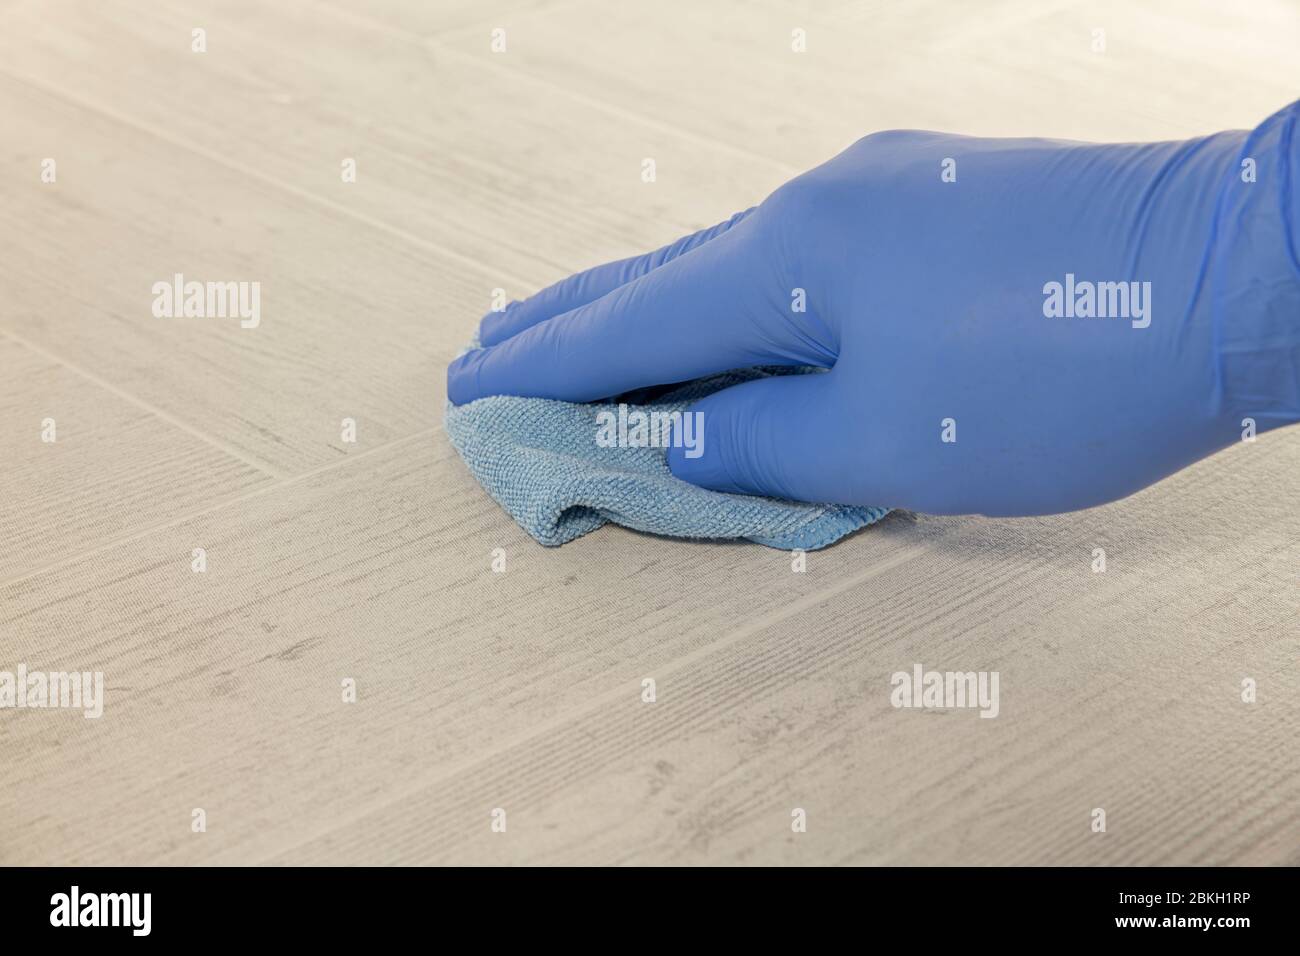 hand with blue rubber glove cleaning a floor with a wiping pad Stock Photo